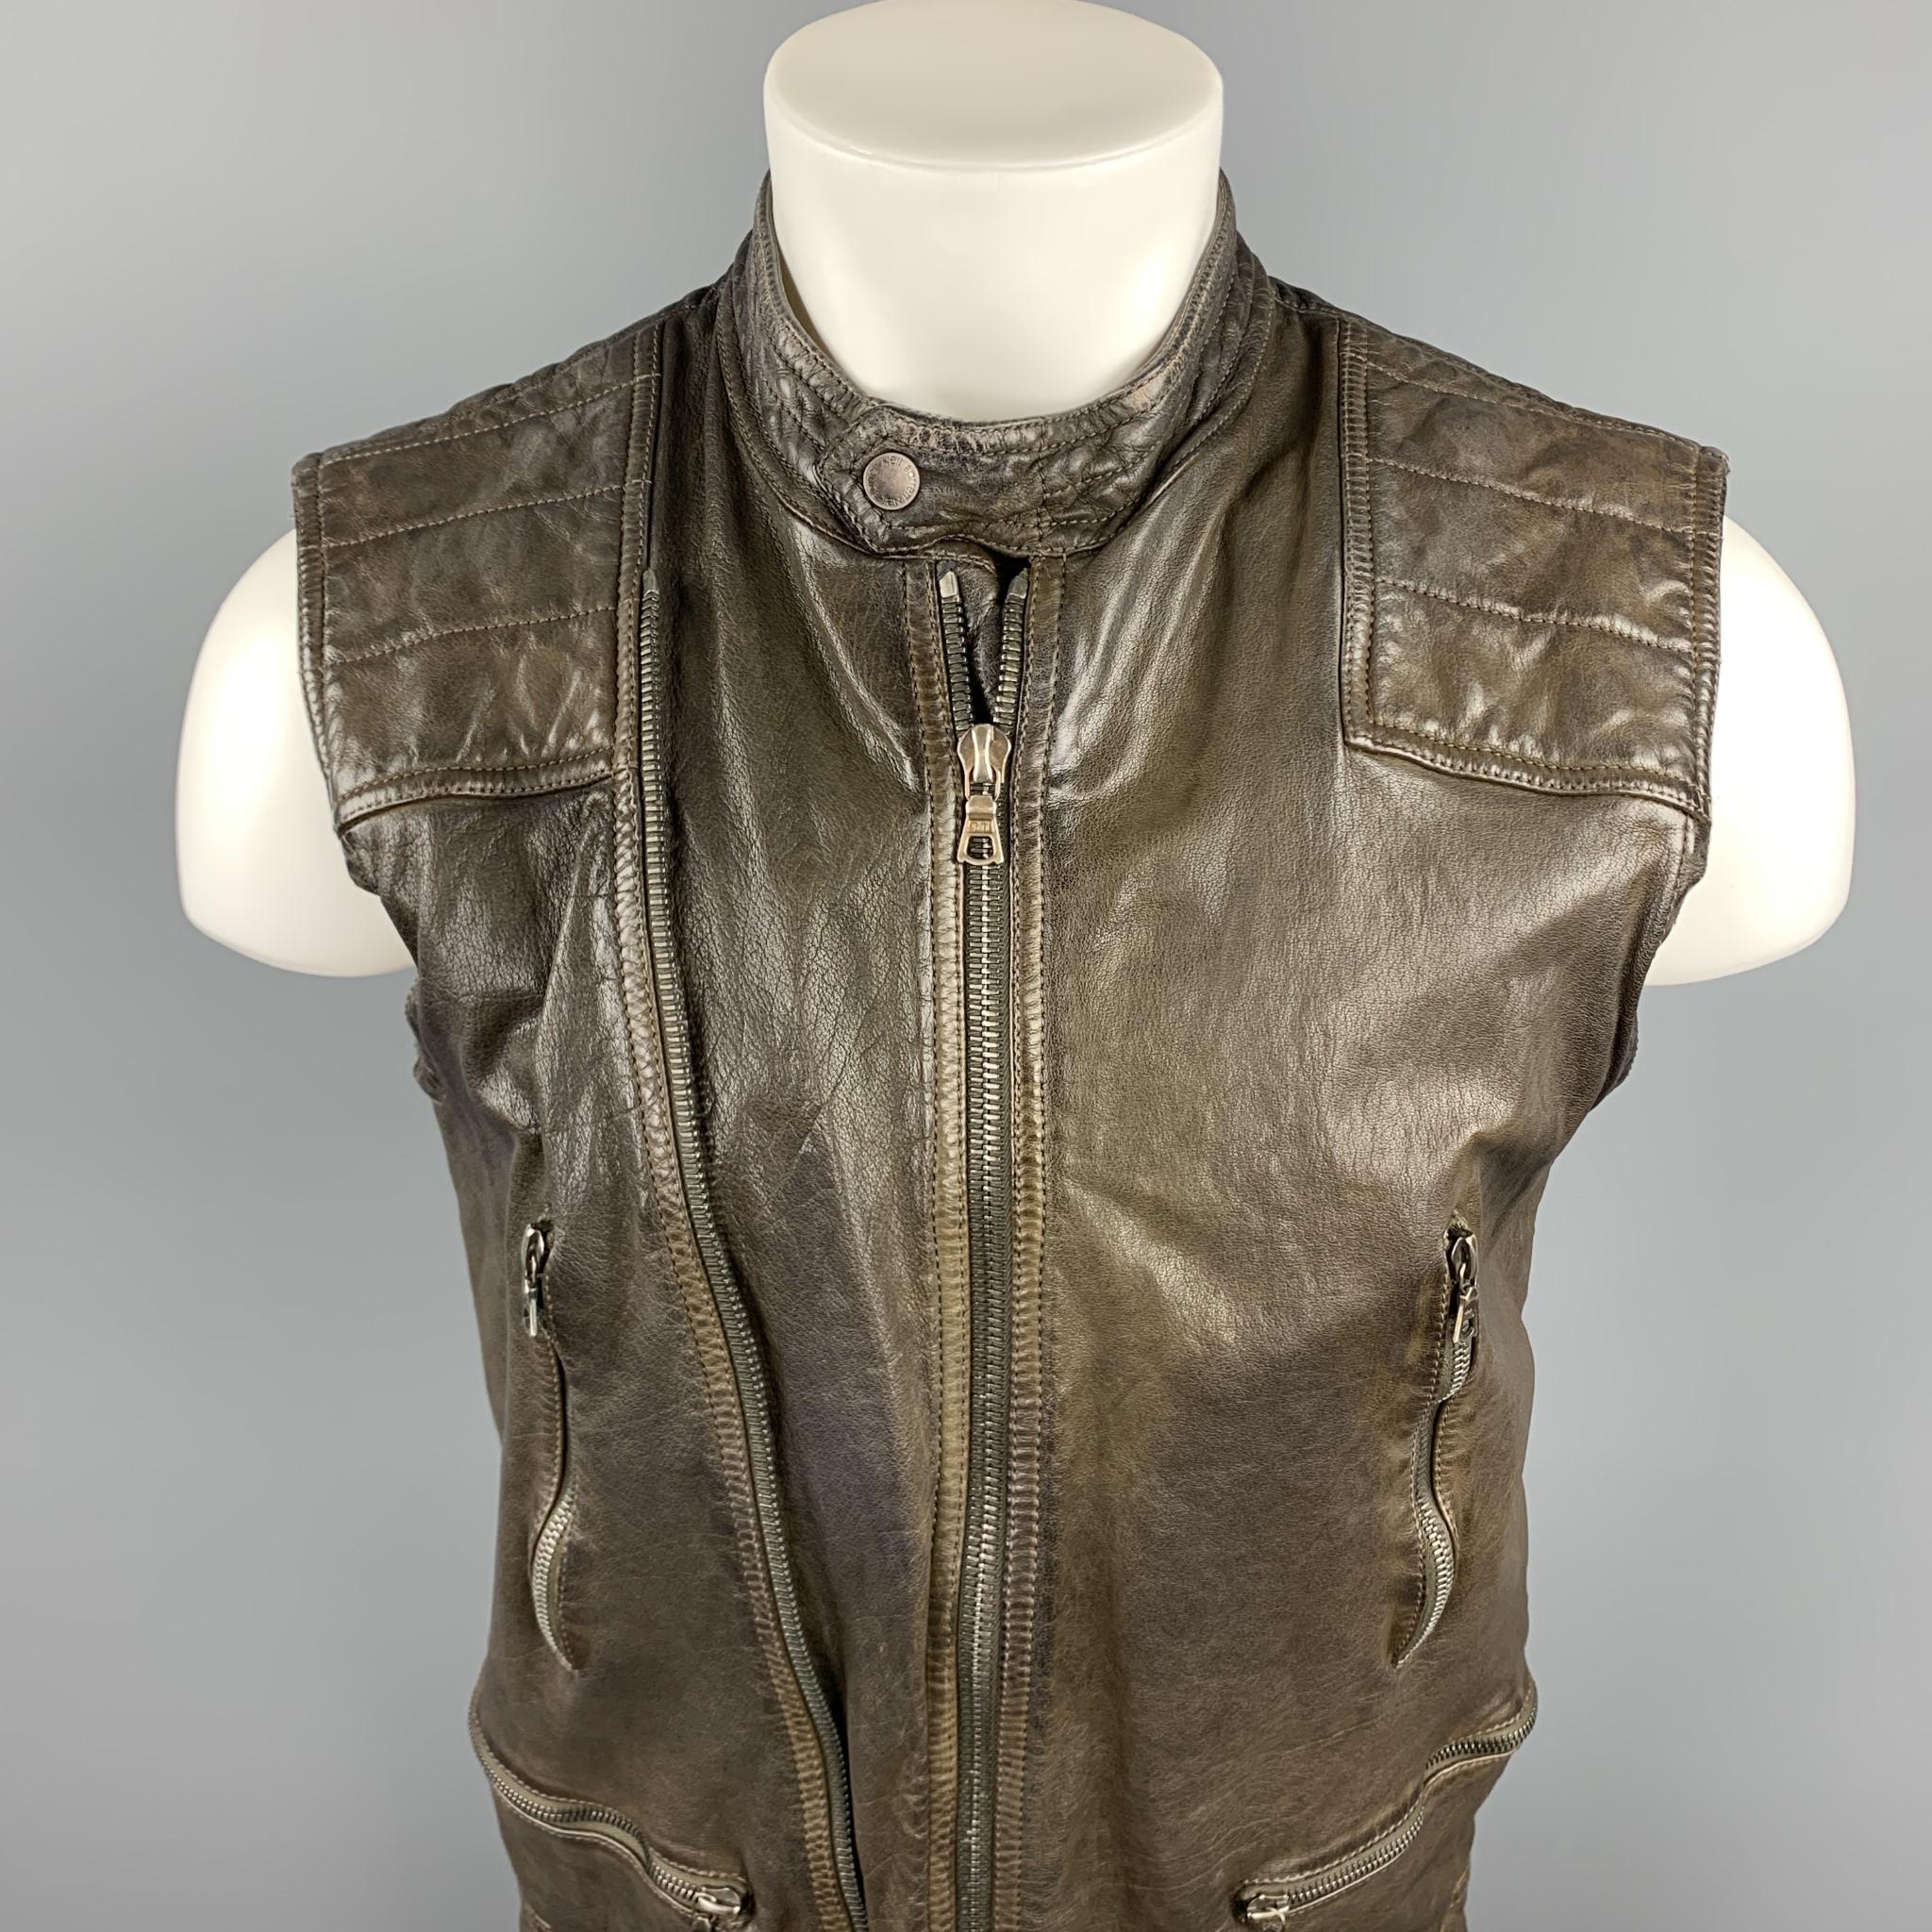 NEIL BARRETT vest comes in a brown distressed water buffalo leather featuring a slim fit, military camo print liner, quilted panel, exposed zipper detail, zipper pockets, and a zip up closure. Made in Italy.  Retail $1995

Excellent Pre-Owned